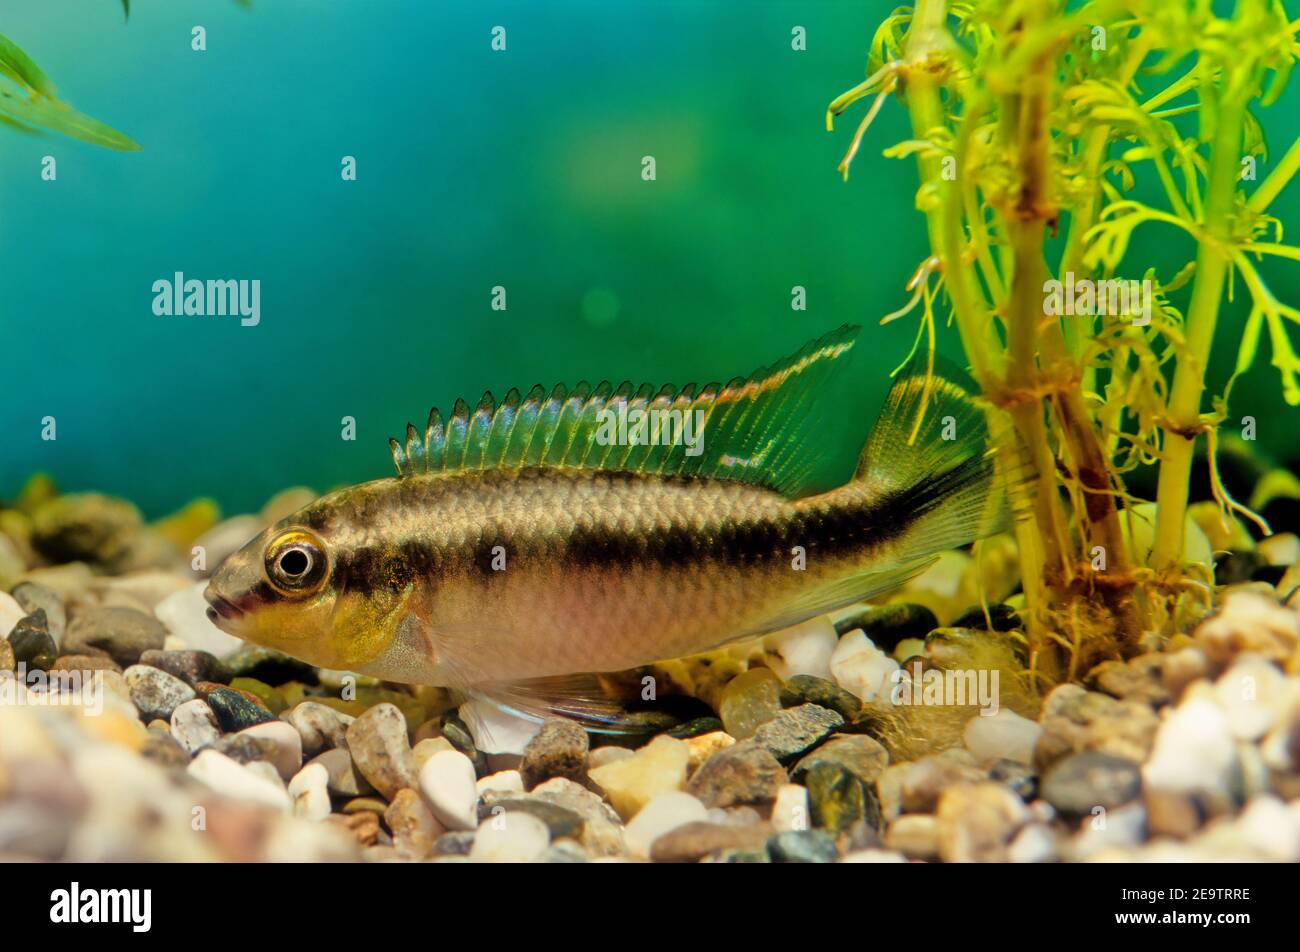 Pelvicachromis pulcher is a freshwater fish of the cichlid family, endemic to Nigeria and Cameroon. Stock Photo